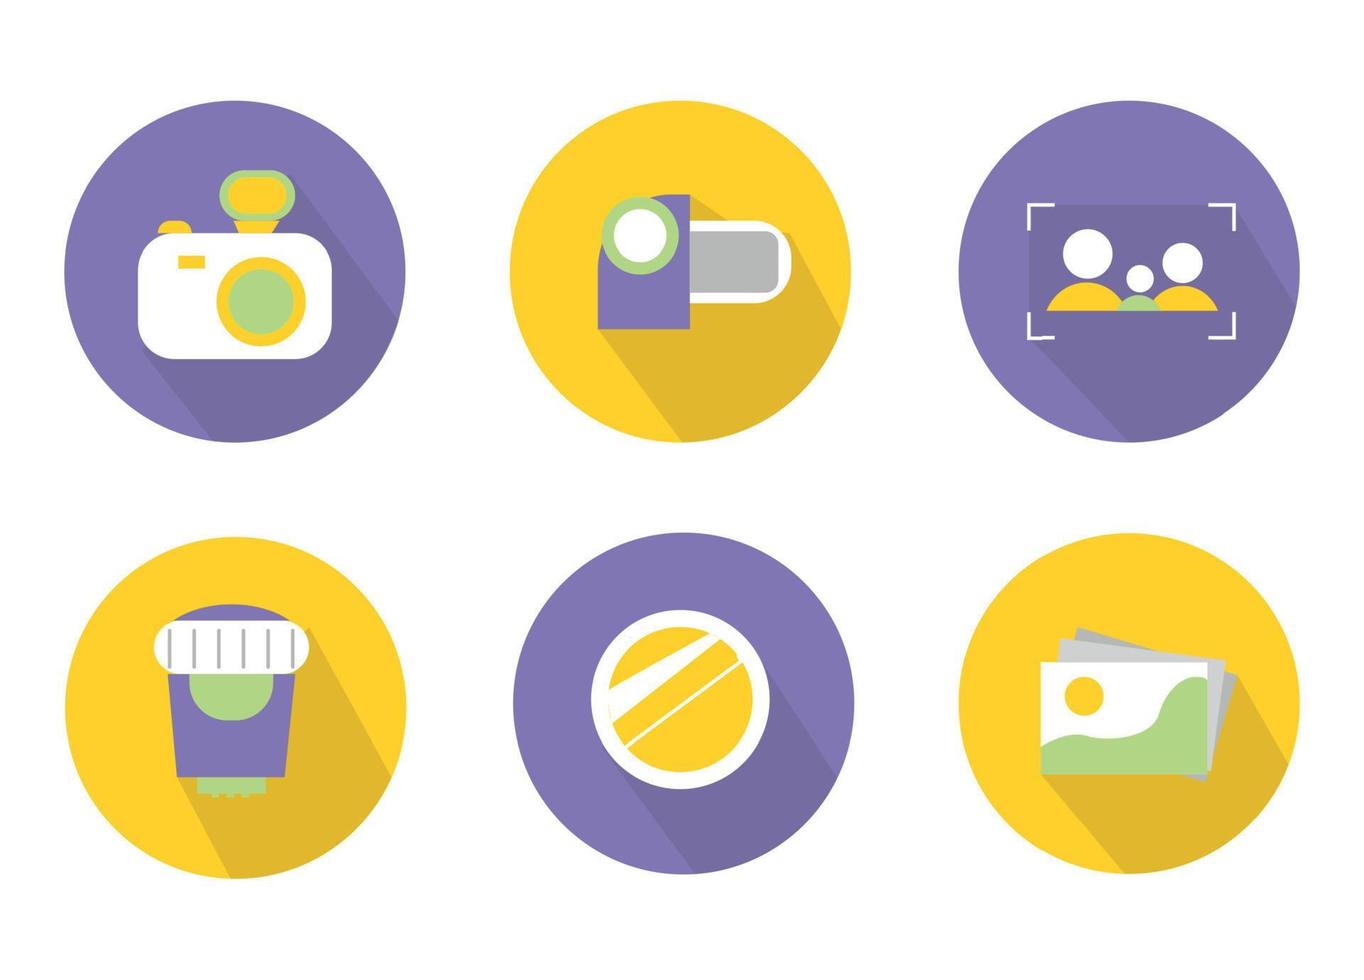 Photography icons. Icon set for the photographer on a colored background. Icons camera, camcorder, lens, lens, photograph, focus with silhouettes, colored, on a yellow and purple background vector